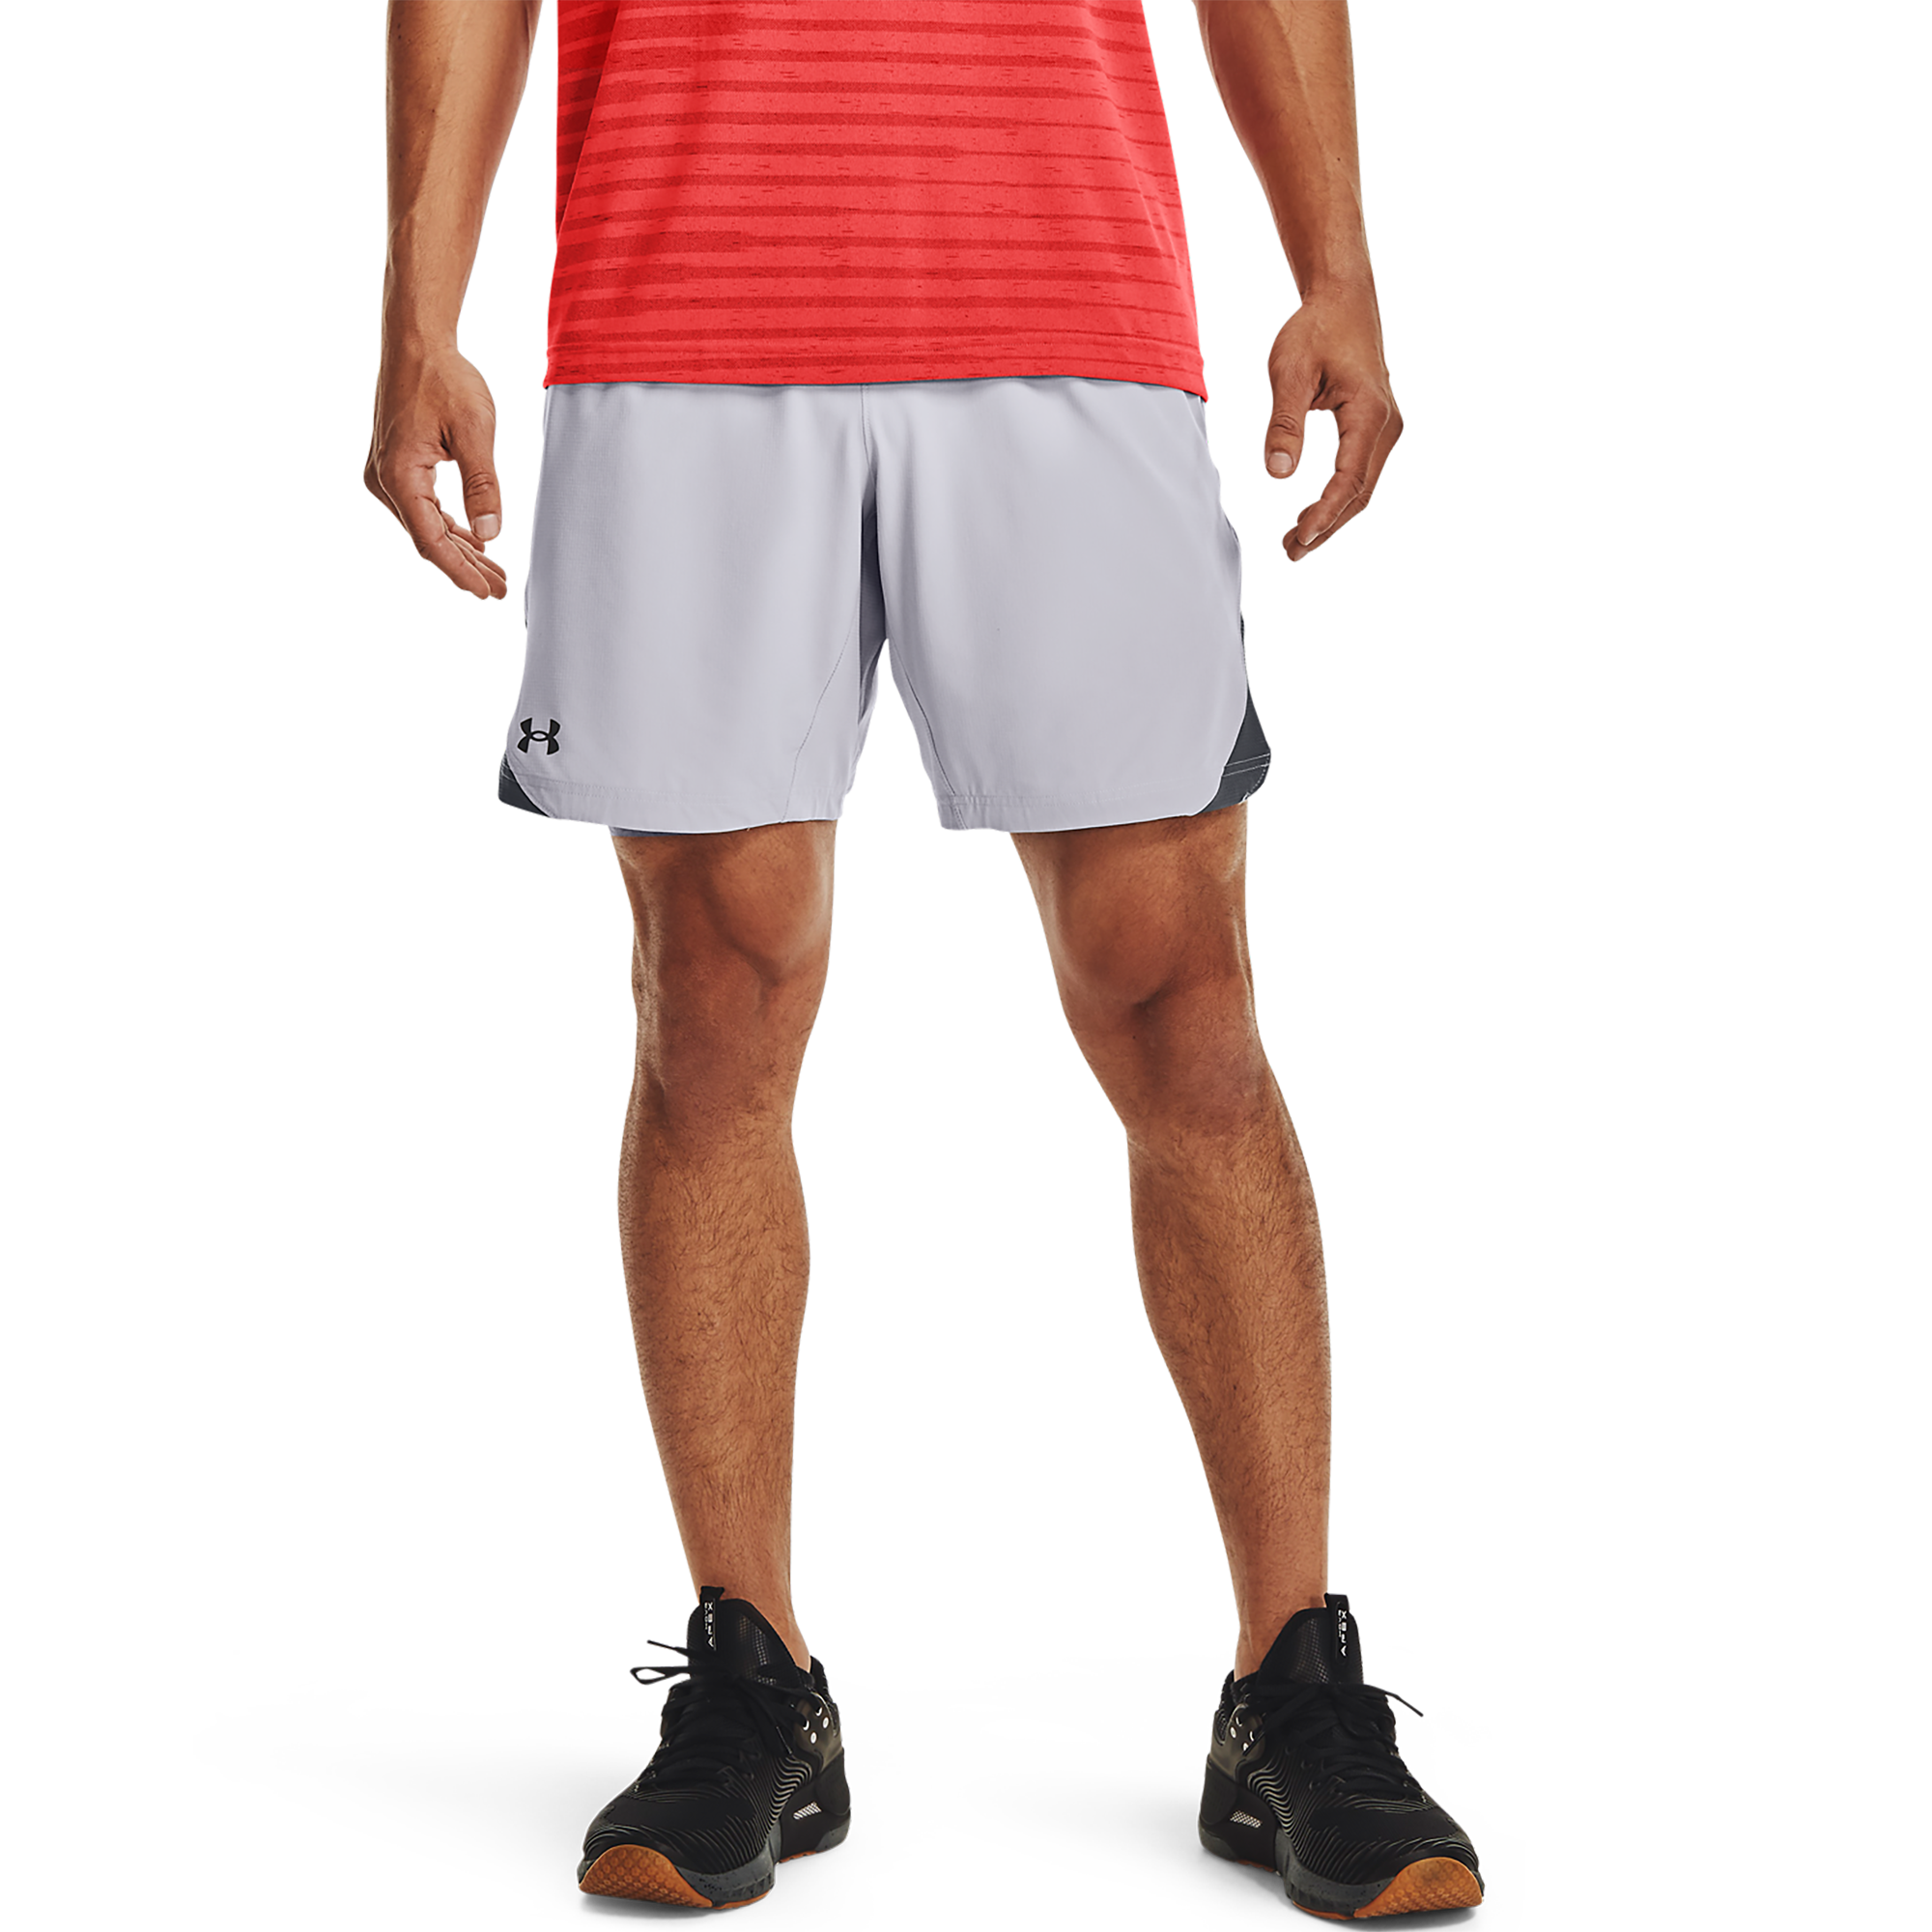 Under Armour Men's Elevated Woven 2.0 Shorts 1362289 012 Gray L Dead Stock